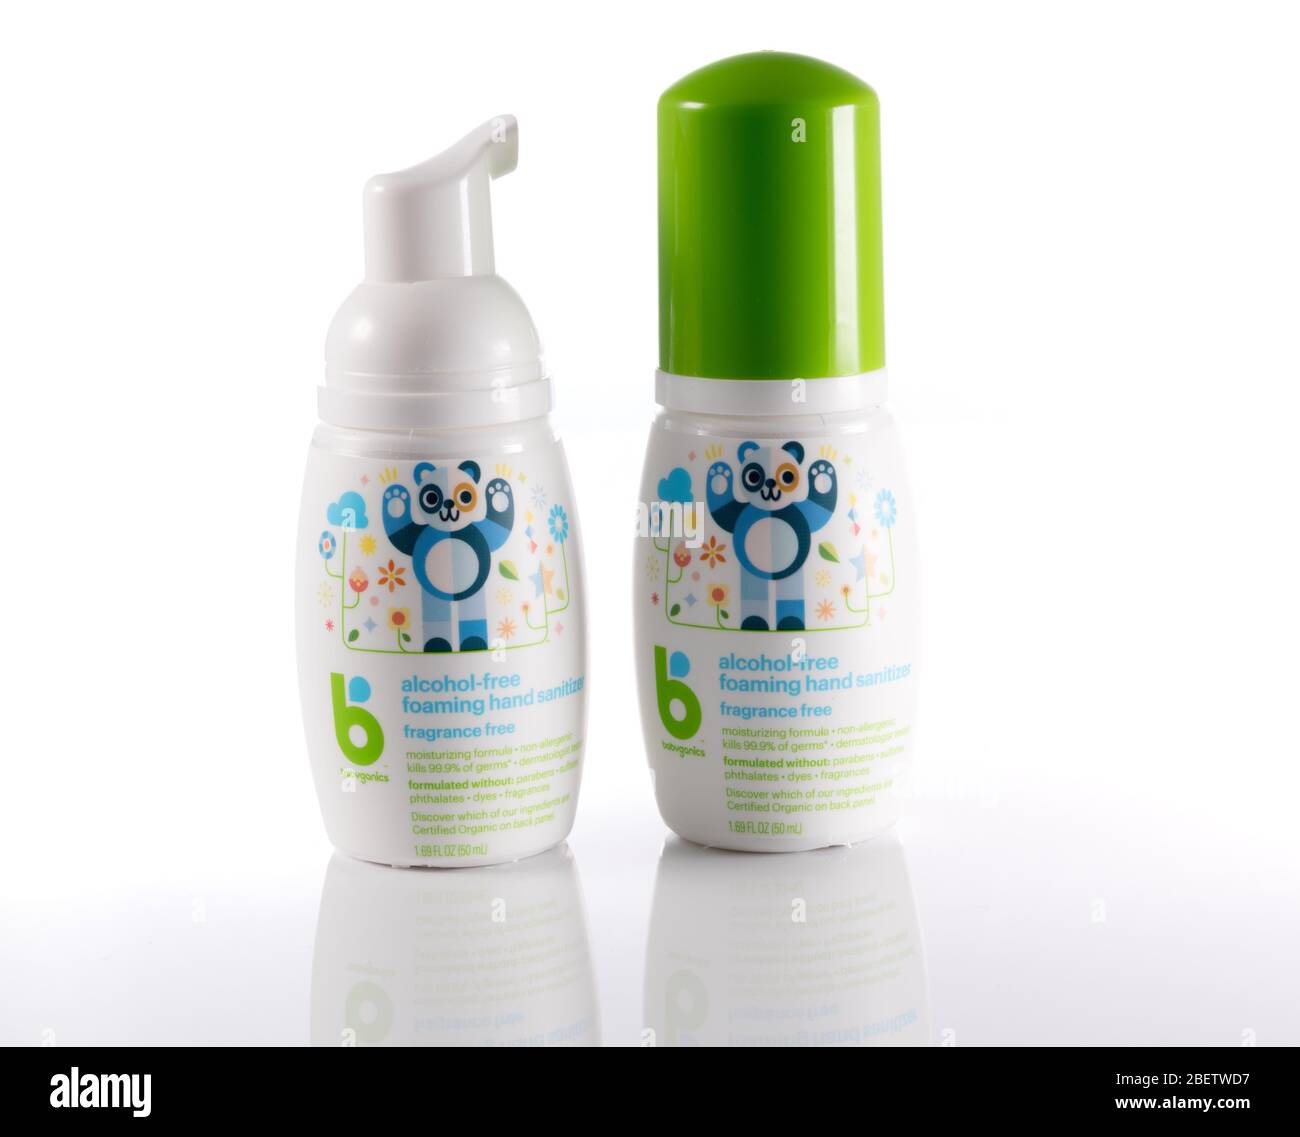 Morgantown, WV - 15 April 2020: Babyganics infant or baby hand sanitizer or  antibacterial and disinfecting spray bottle on white background Stock Photo  - Alamy